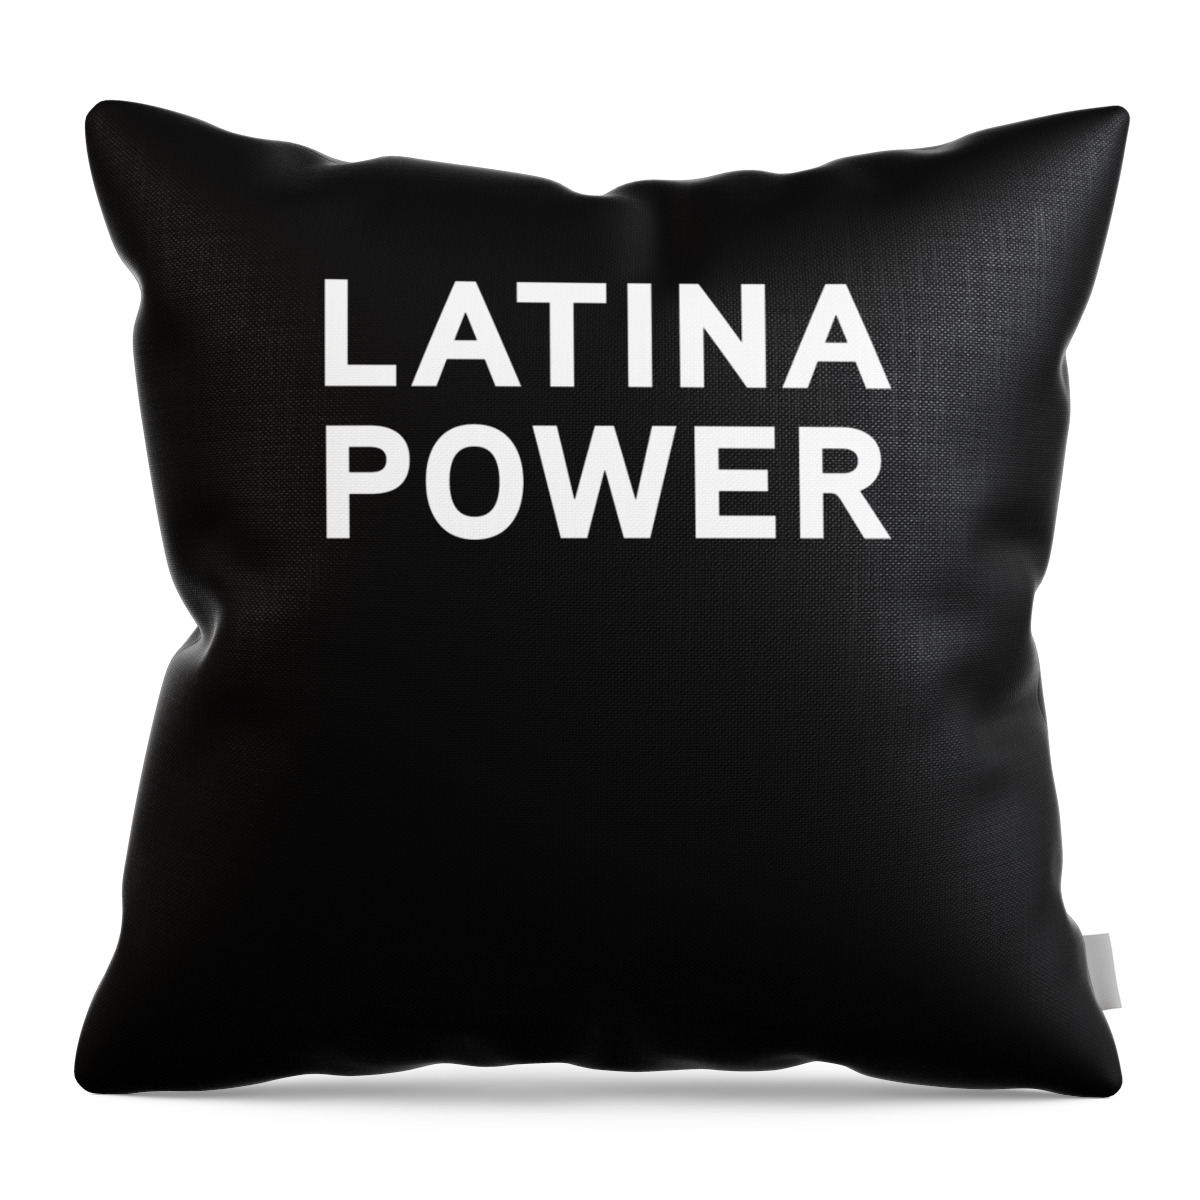 Funny Throw Pillow featuring the digital art Latina Power by Jane Keeper